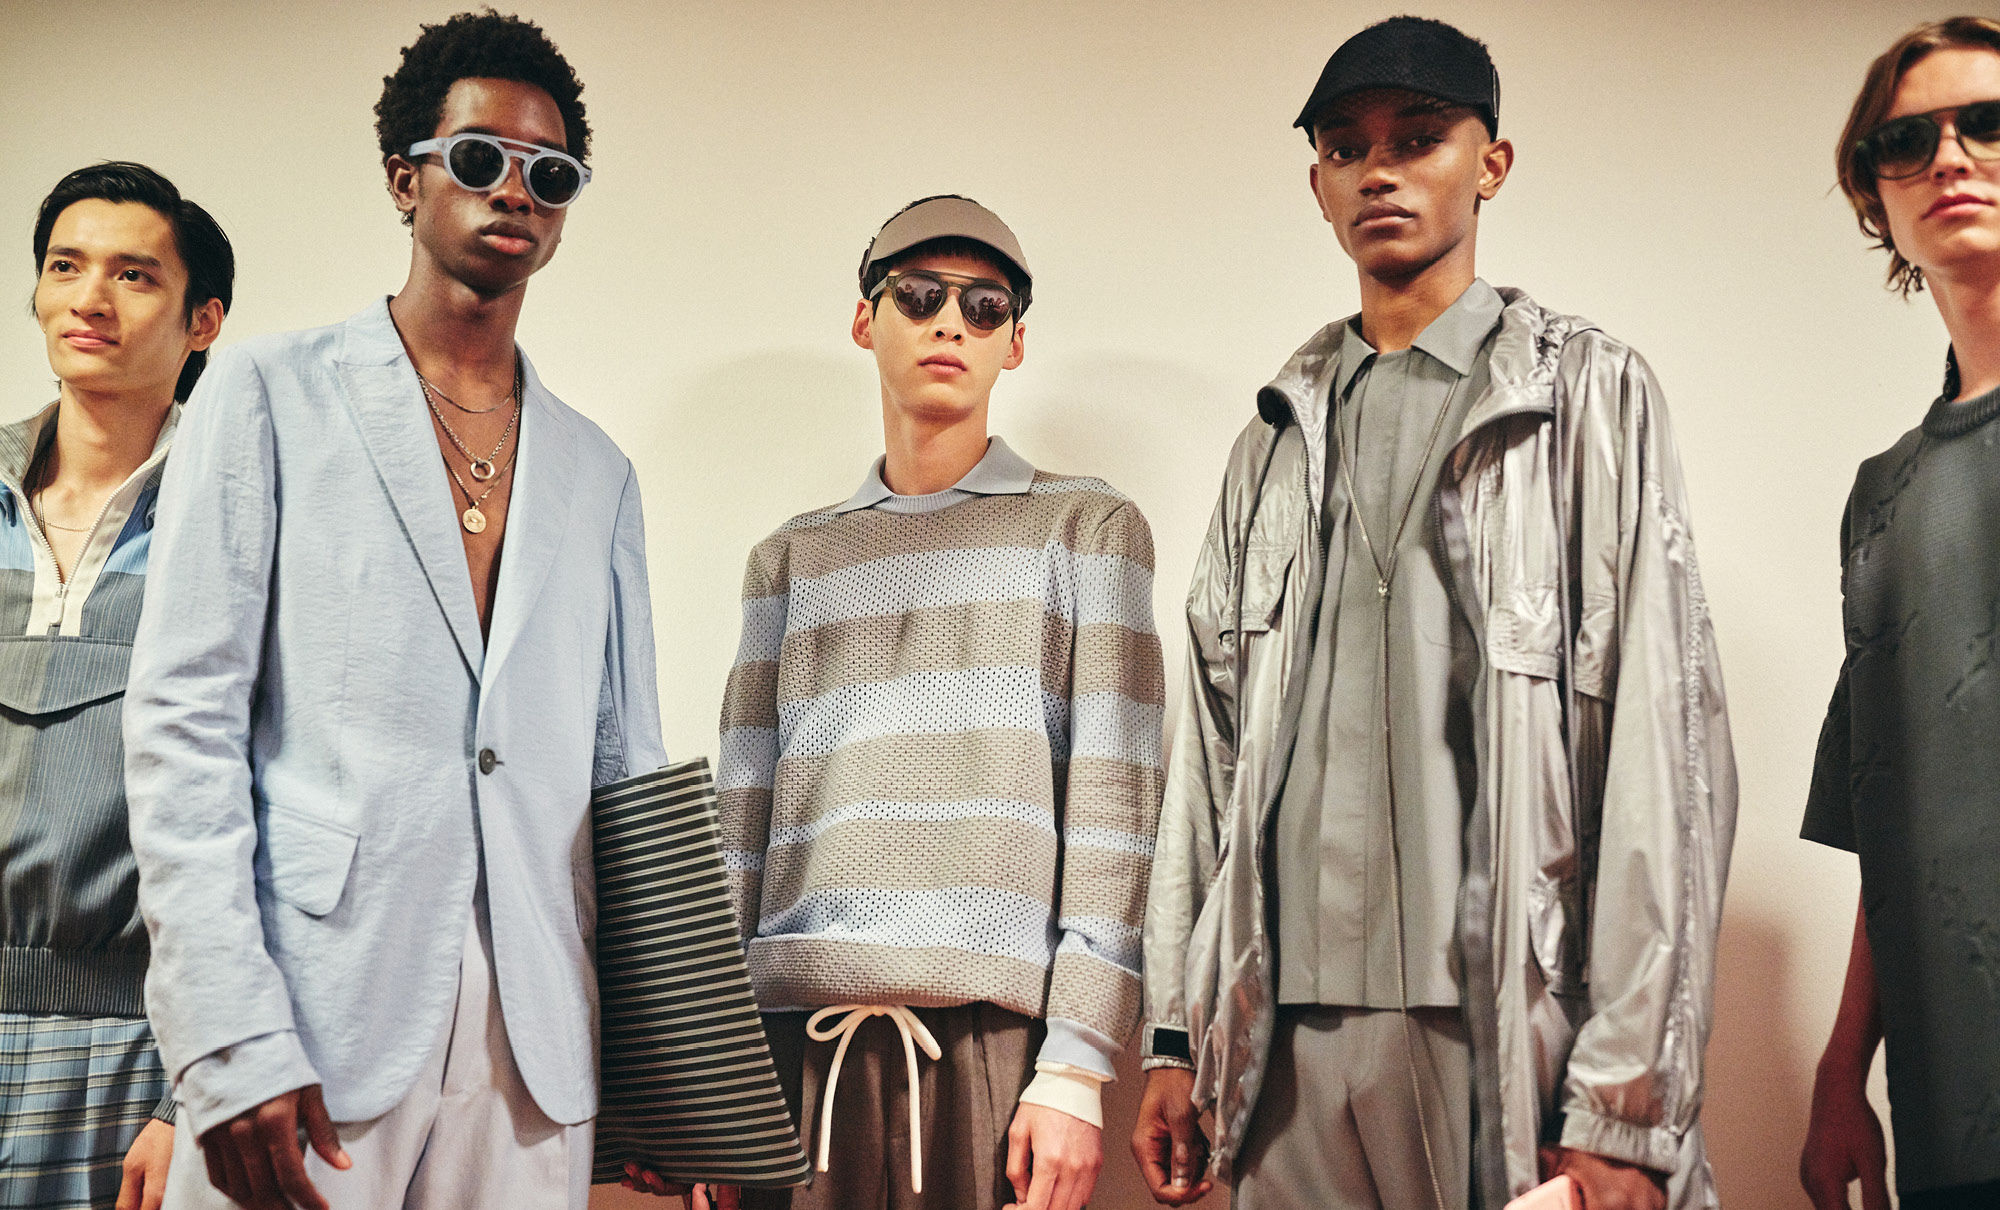 Zegna goes weightless with ultra exclusive SS '19 couture line